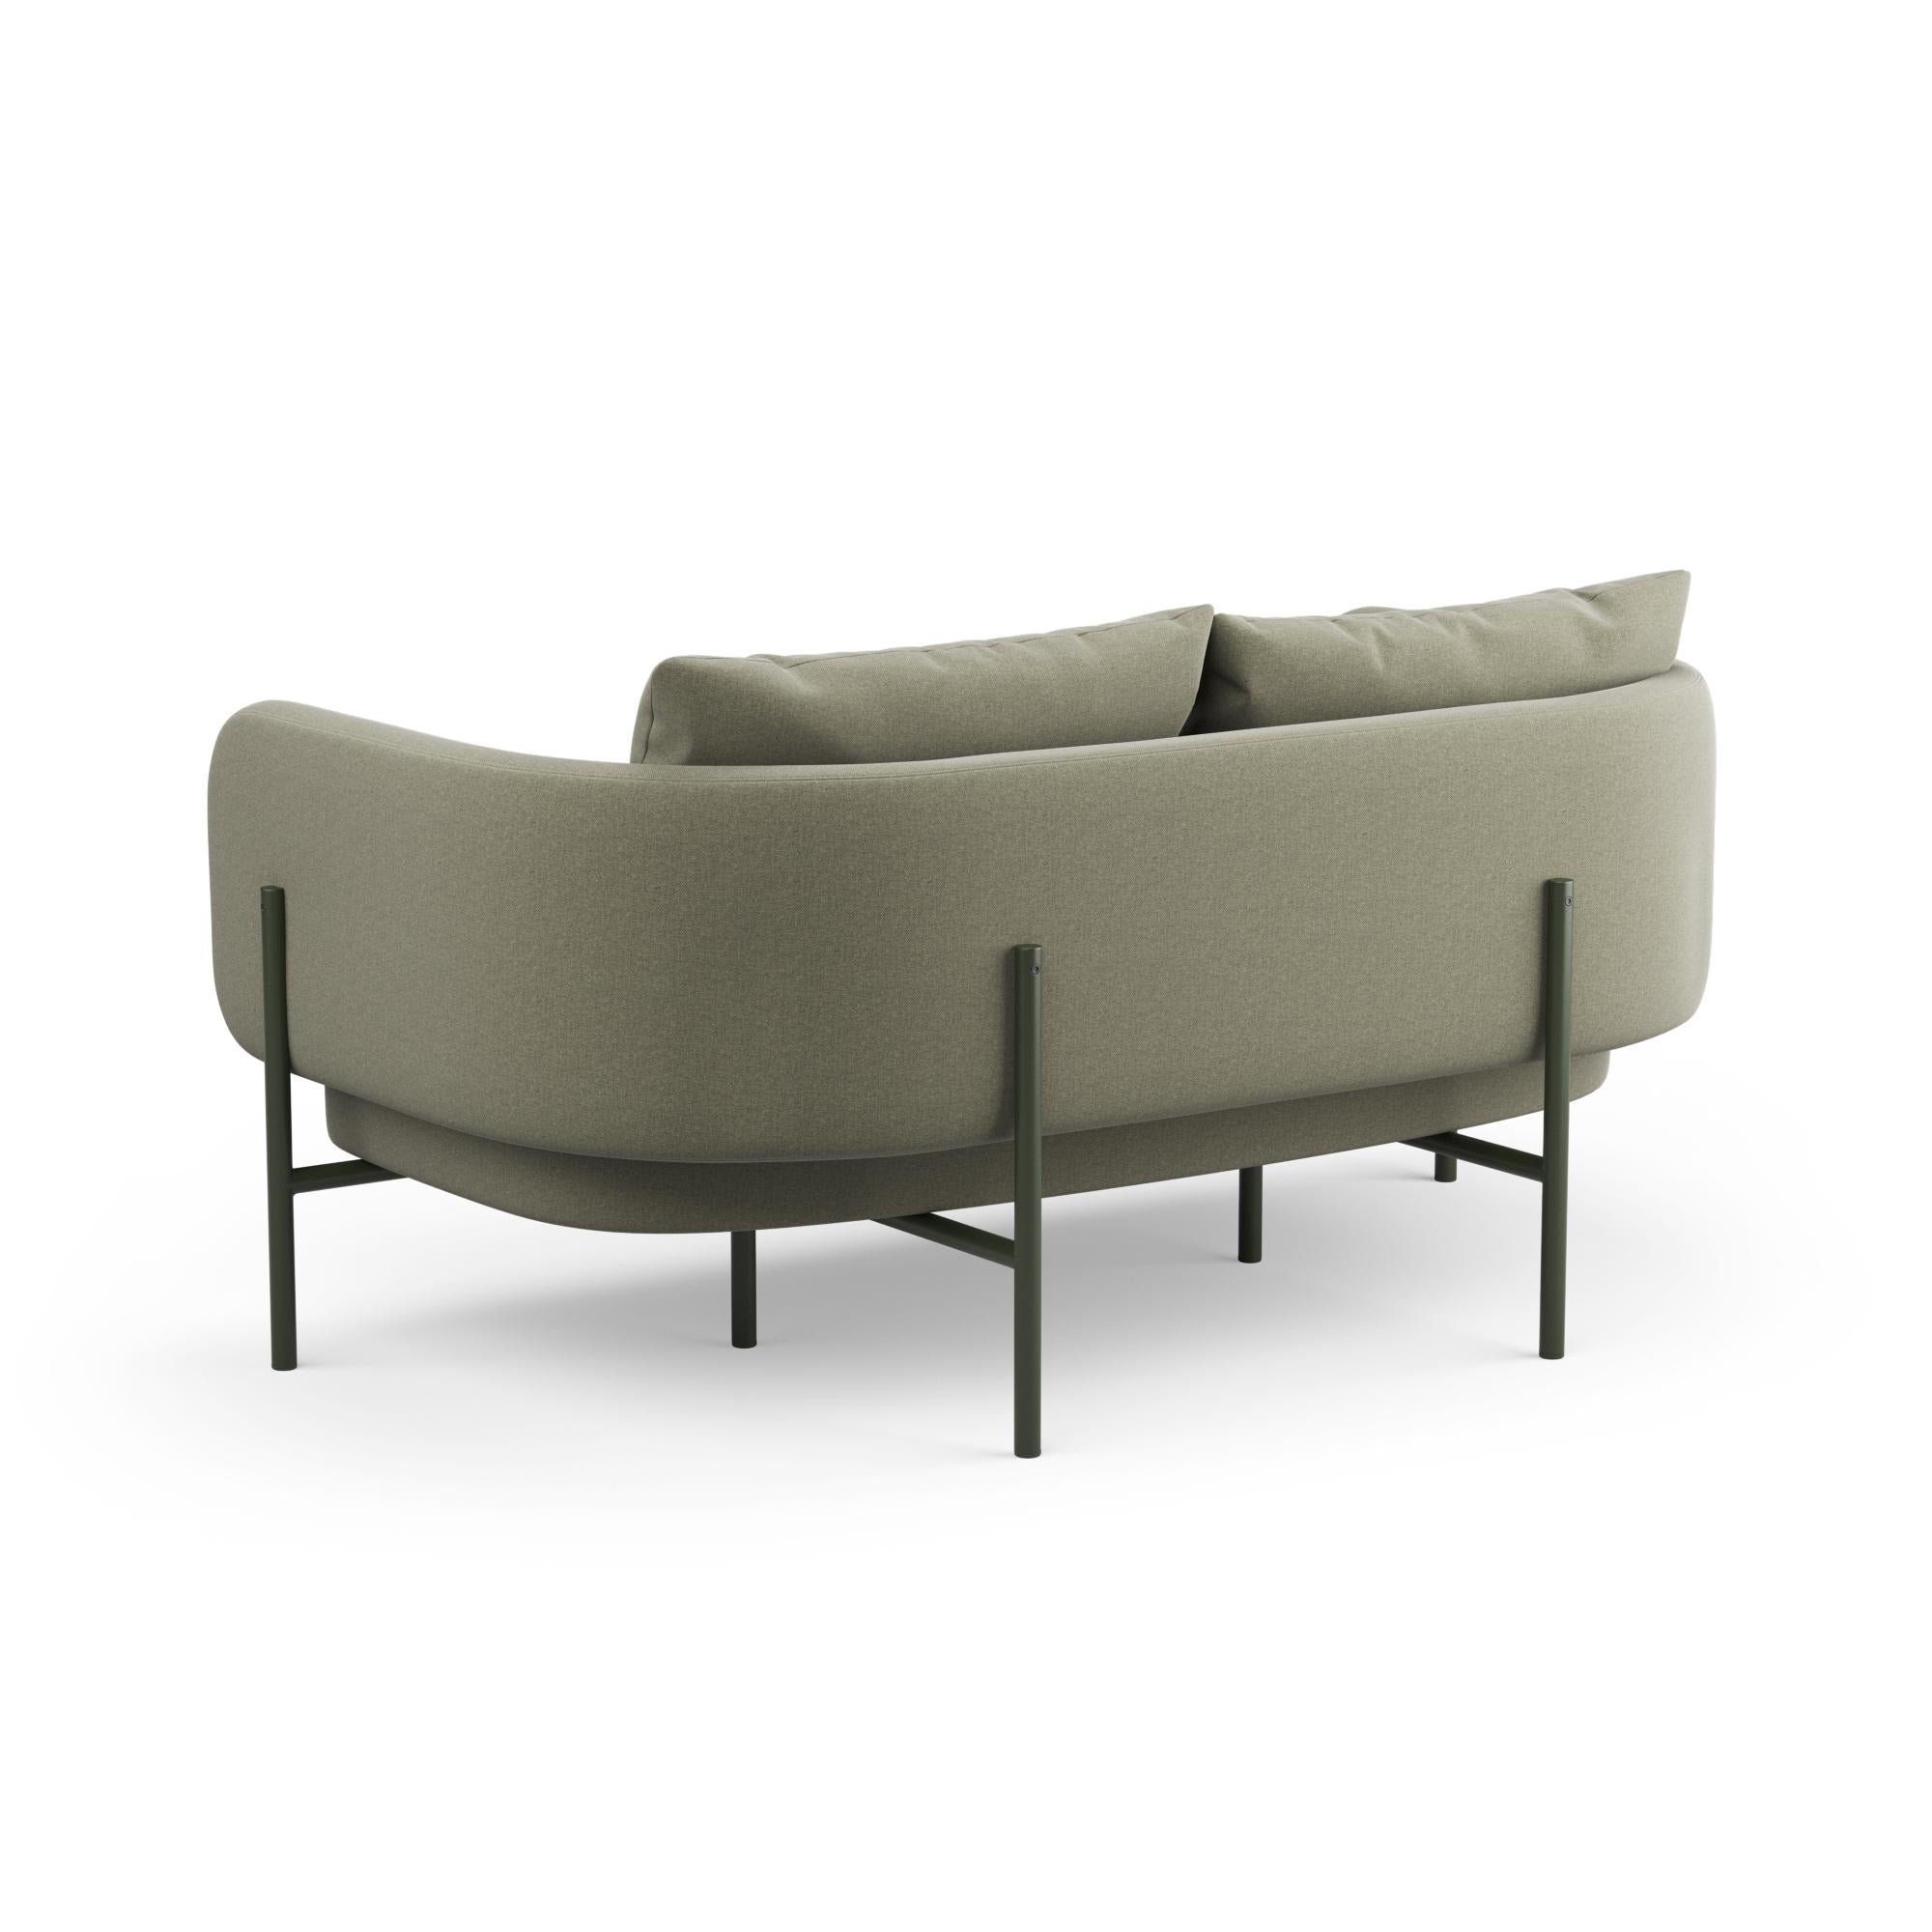 European Hayche Abrazo 2 Seater Sofa - Green, UK, Made to Order For Sale